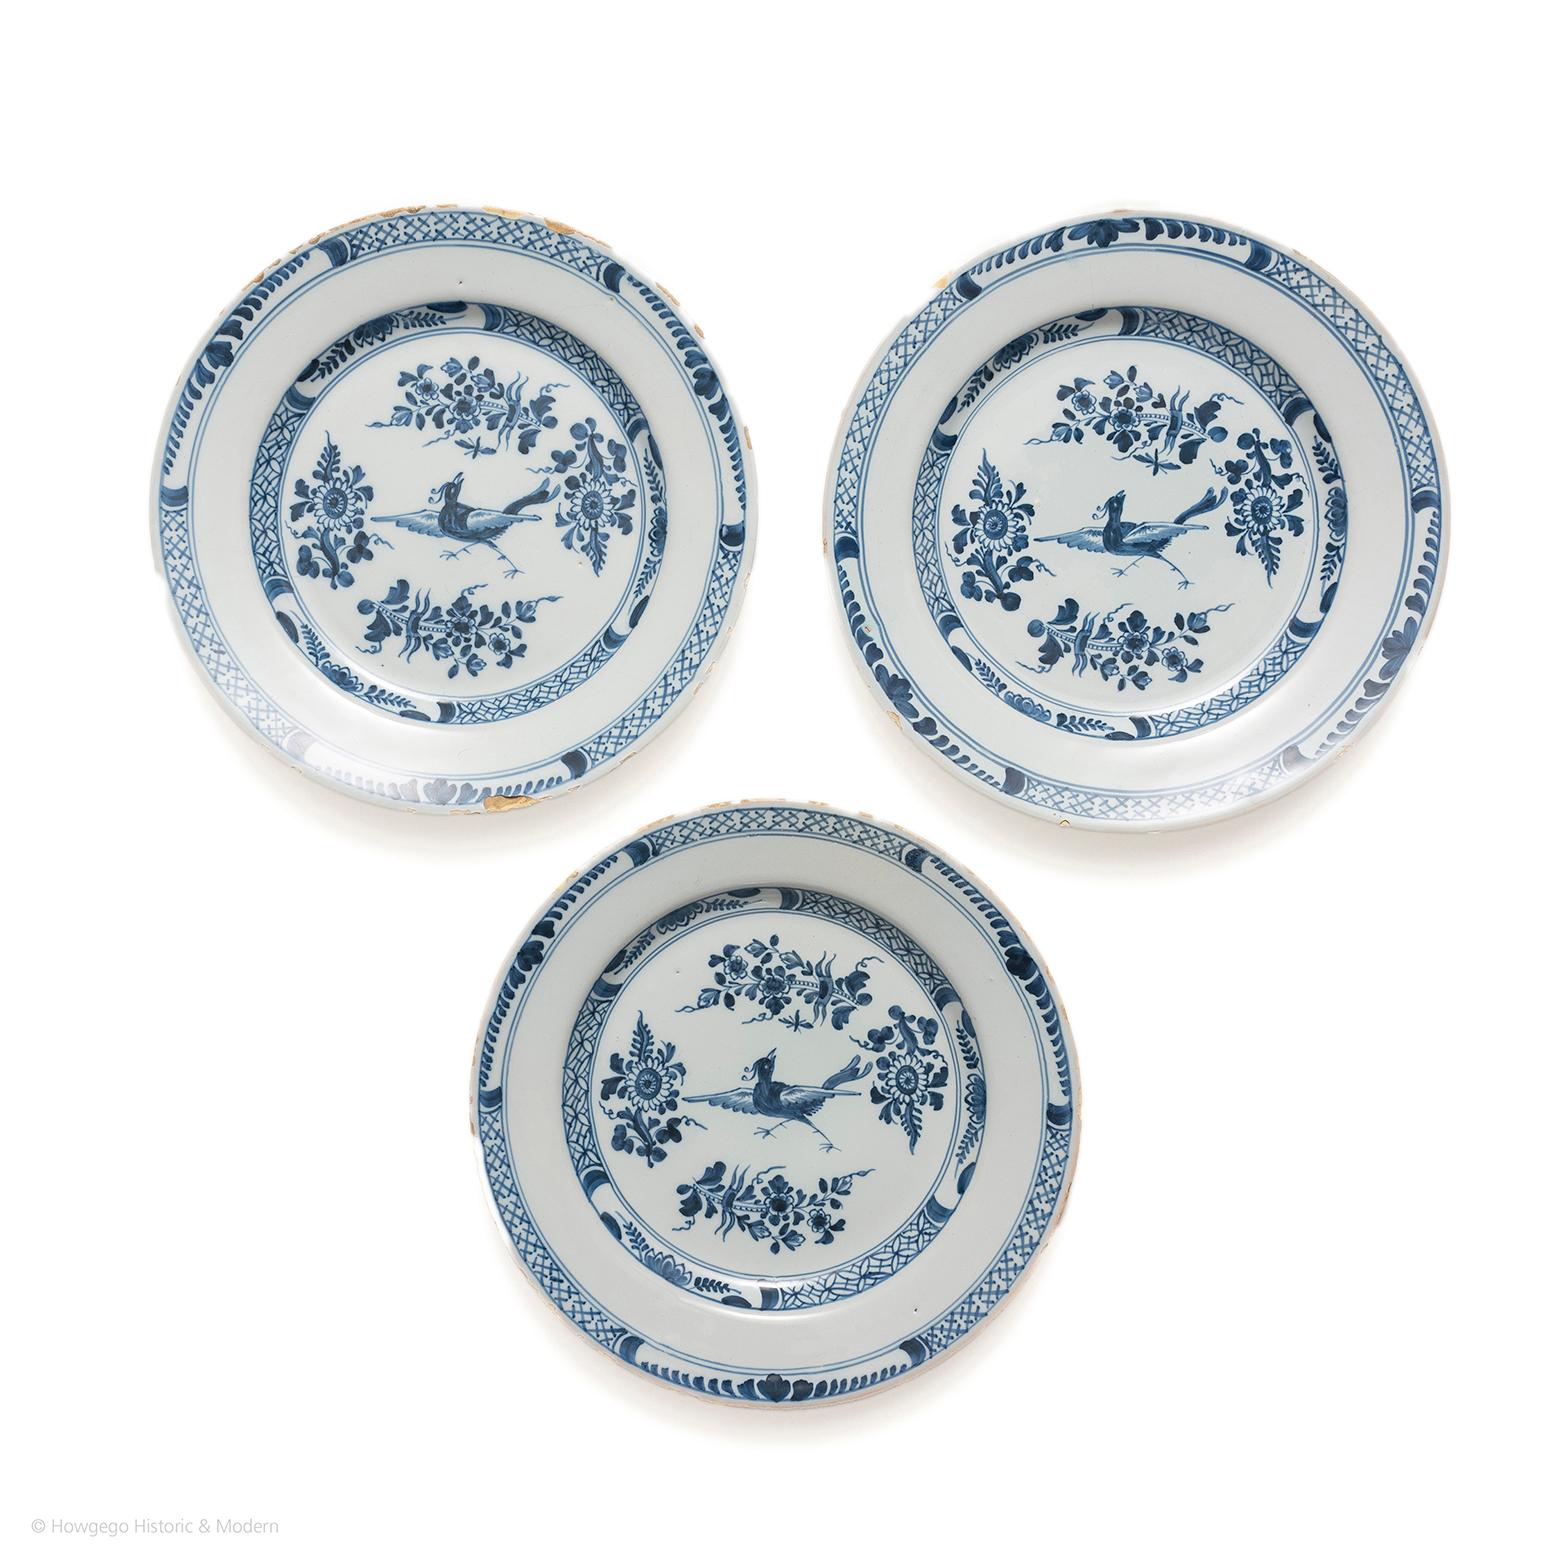 Charming set of plates with the exotic bird suspended showing the fantasy element of Chinoiserie.

Decorated with an exotic bird in flight surrounded by four stylised floral sprays surrounded by a trellis diaper border with four demi-flowerhead